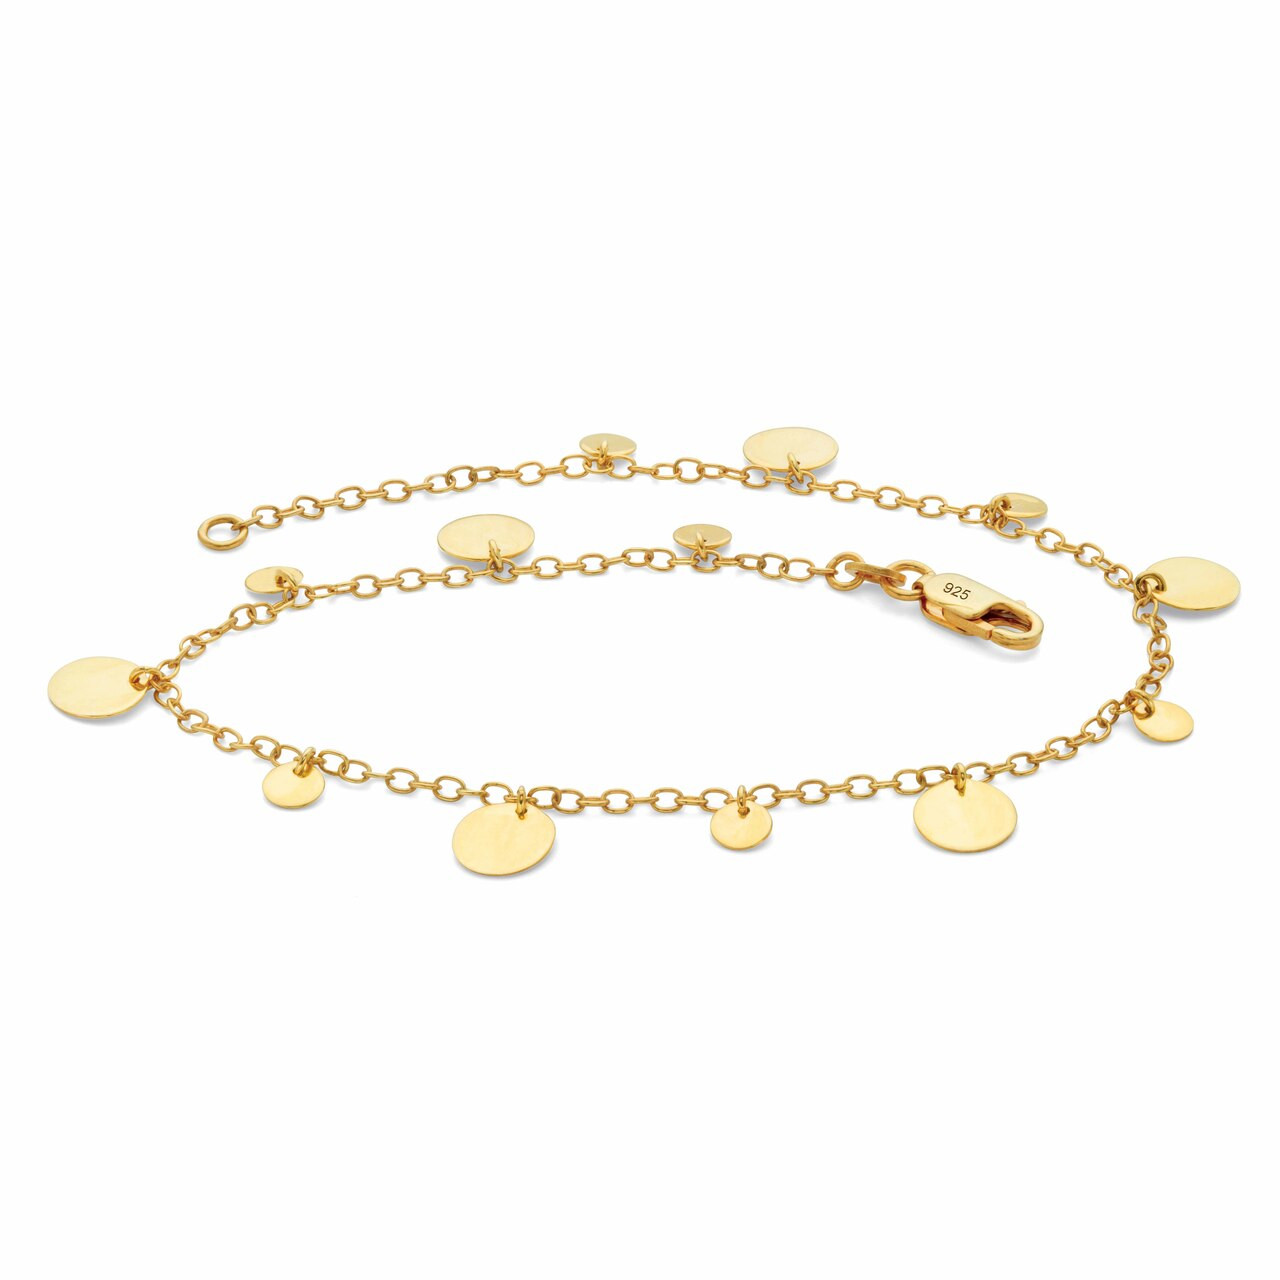 Round Circle Disc Charm Ankle Bracelet in 18k Gold-plated Sterling Silver 10-inch